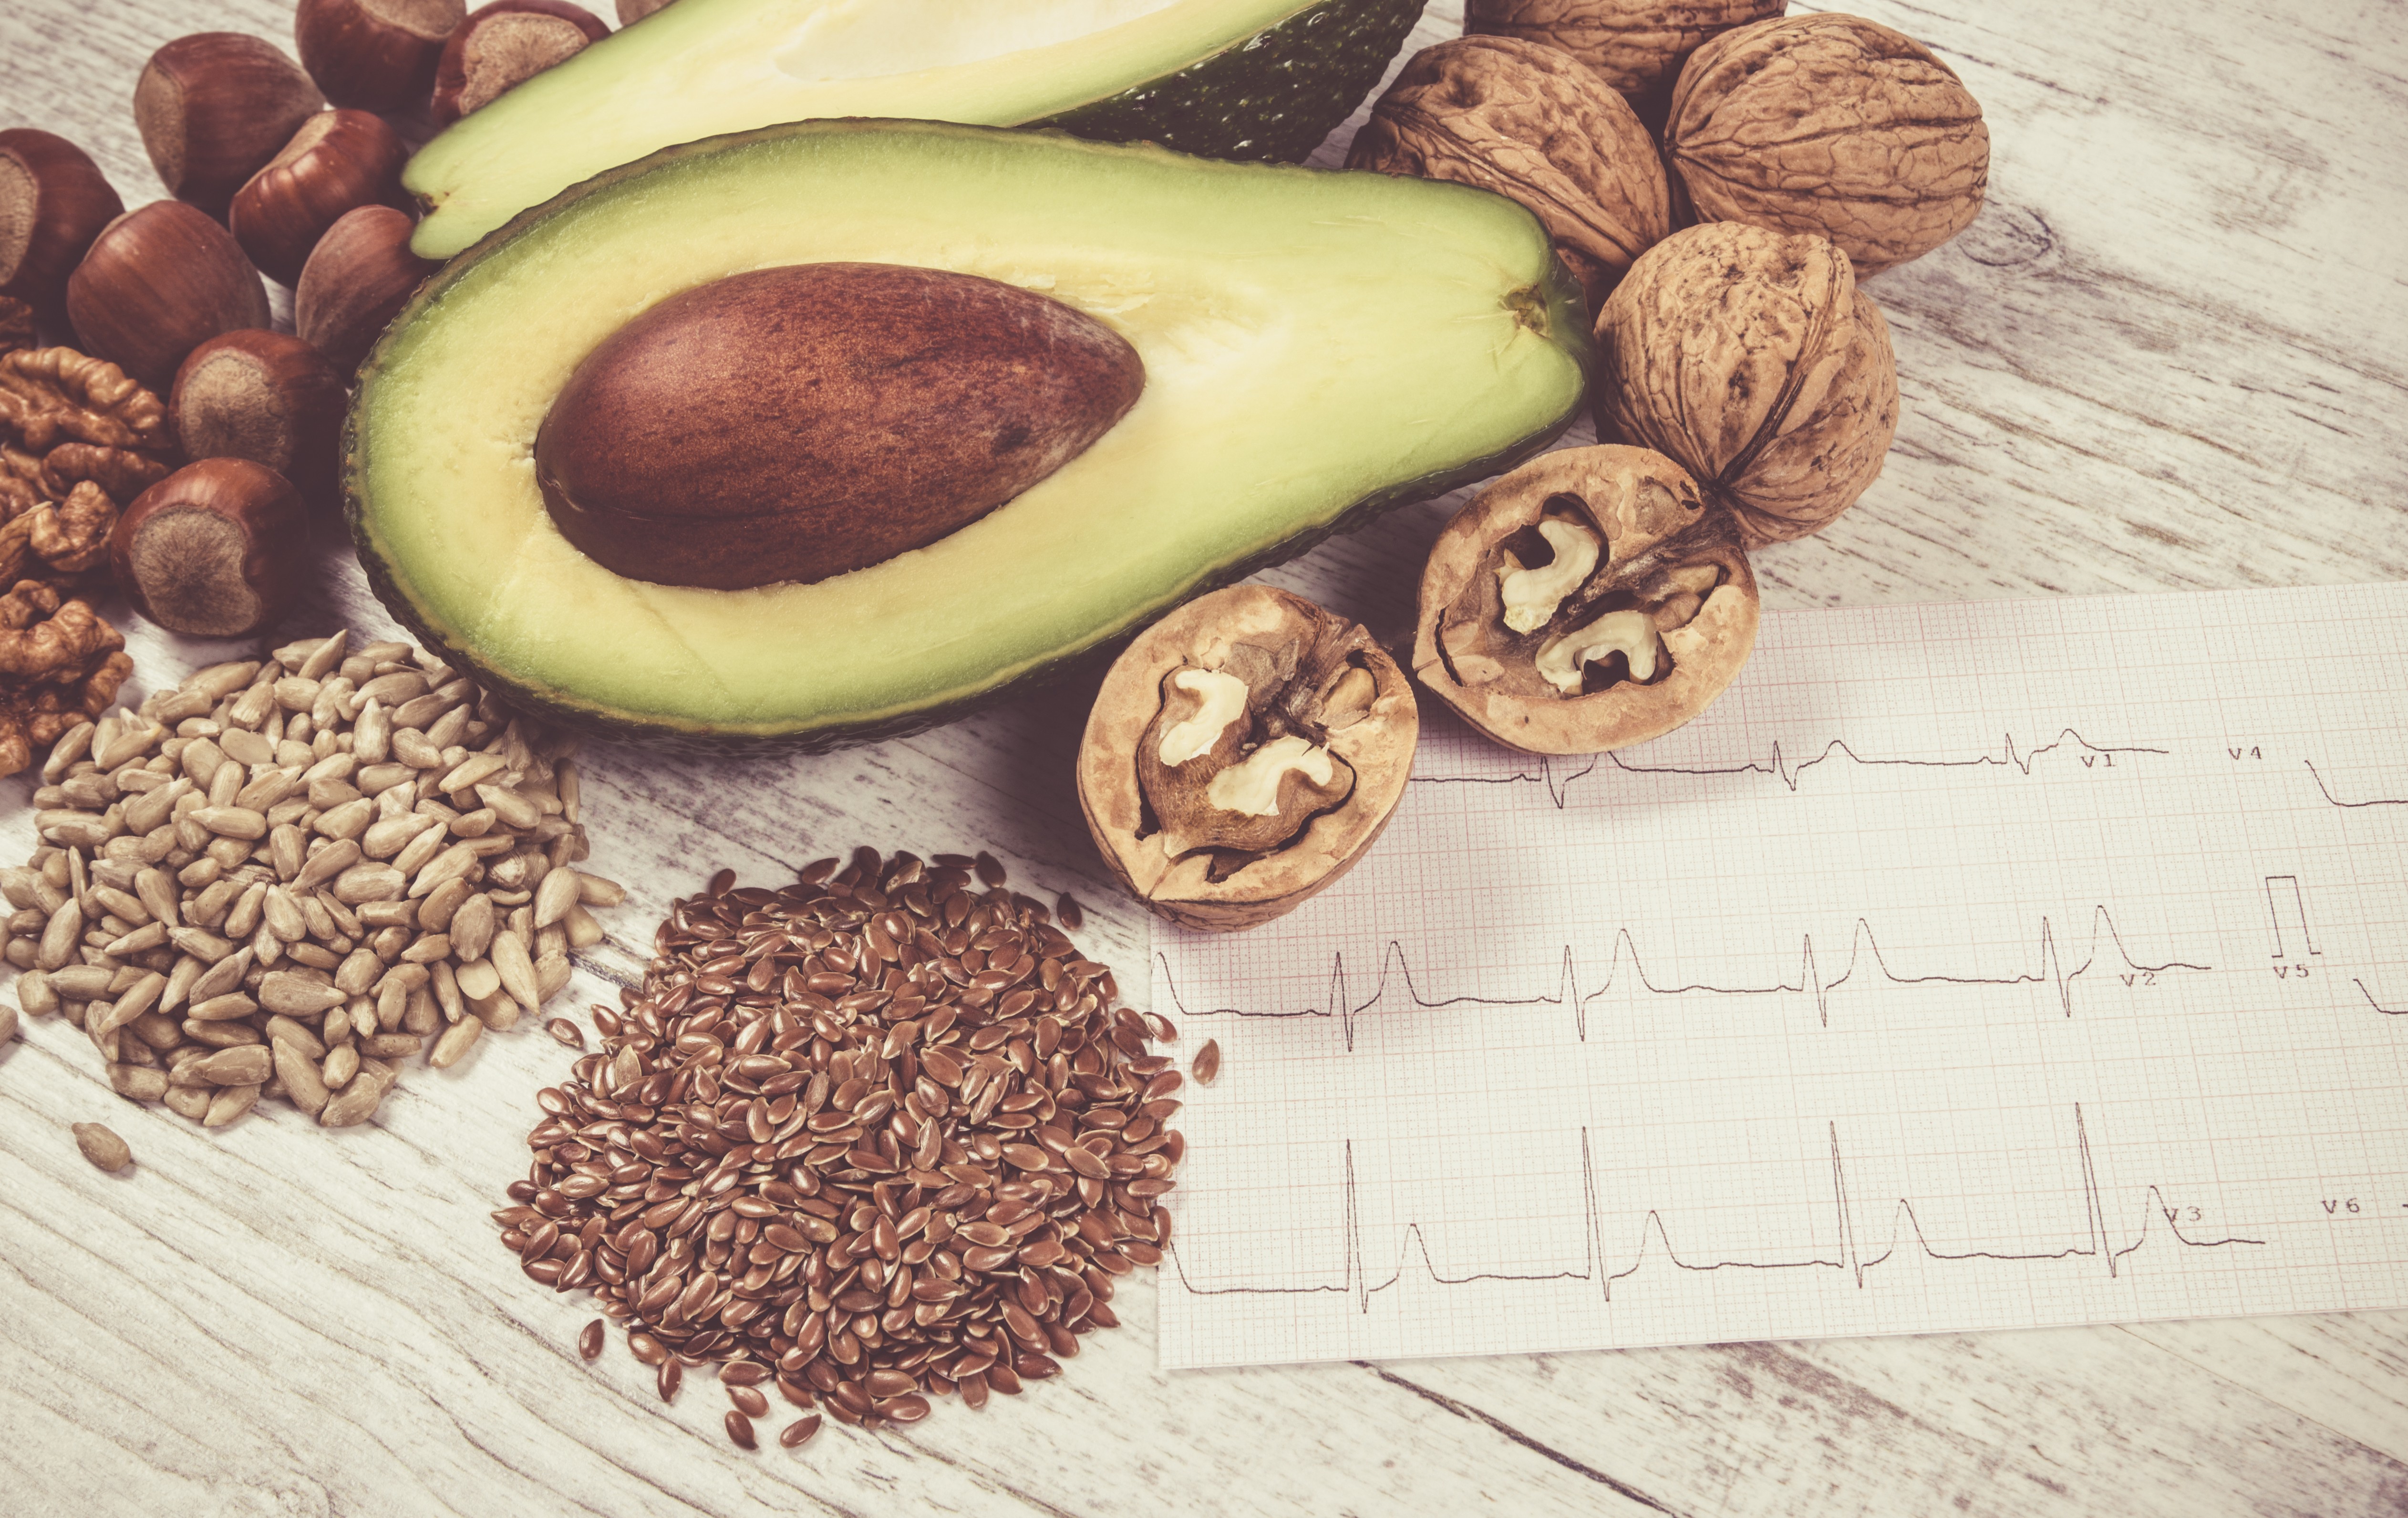 Foods high in DHA, an omega-3 fatty acid vital during pregnancy, include avocados, flaxseeds, walnuts and sunflower seeds. Photo: Shutterstock